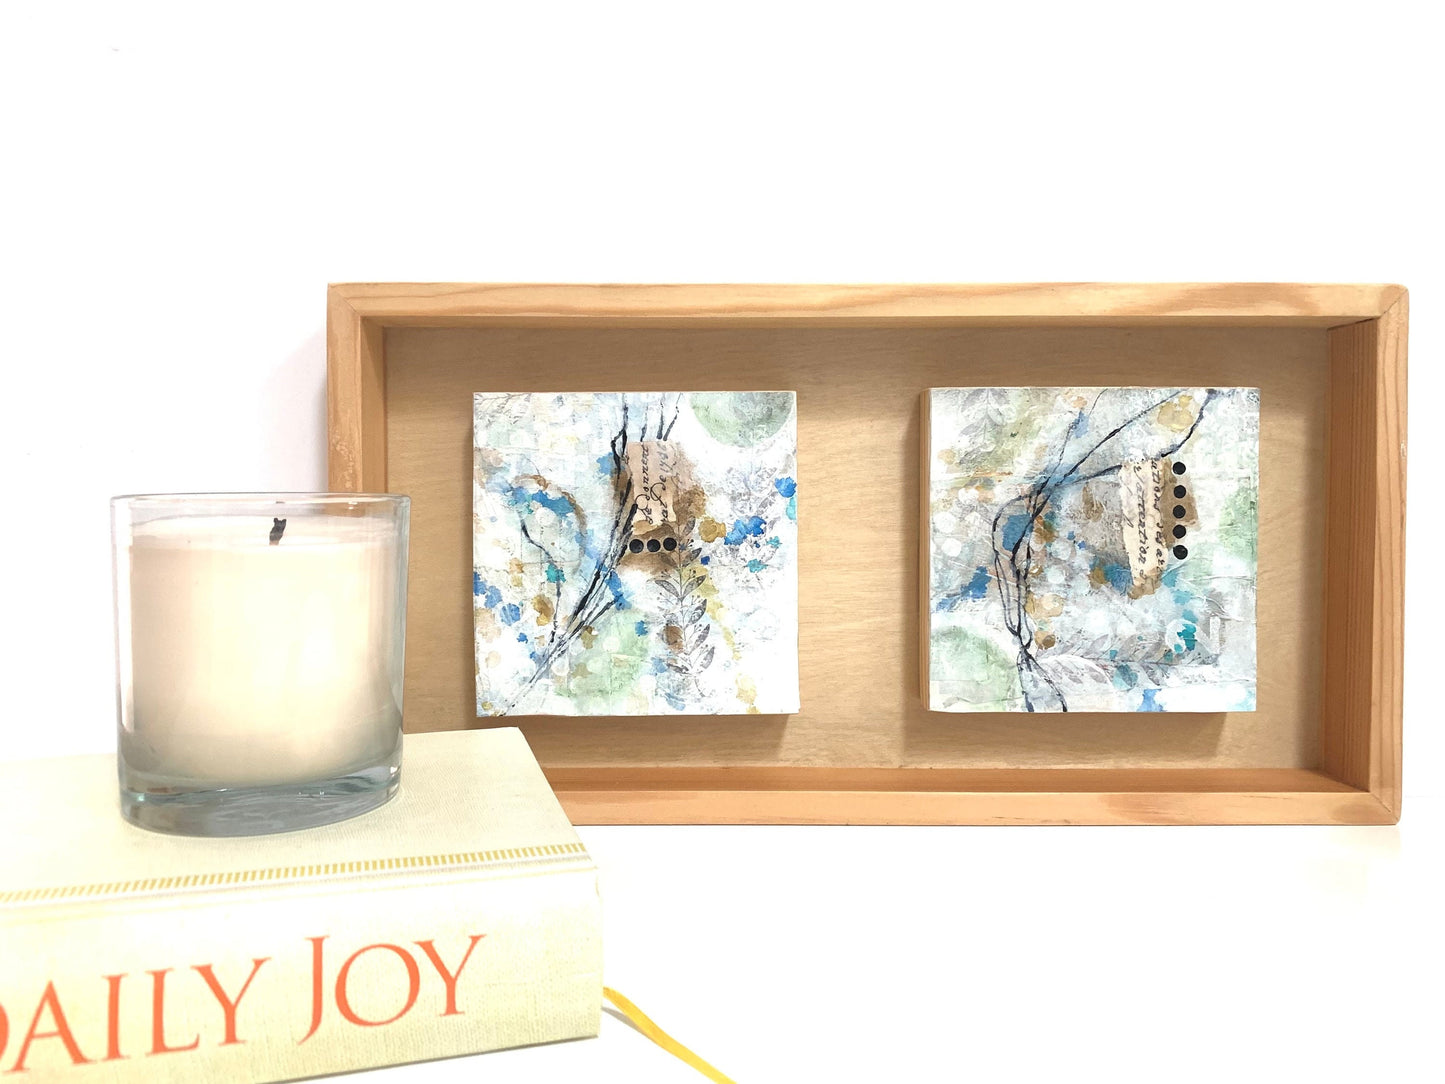 Blue Mood 1 collage art One of a kind natural wood soothing decor housewarming gift original artwork nature accent framed wallart